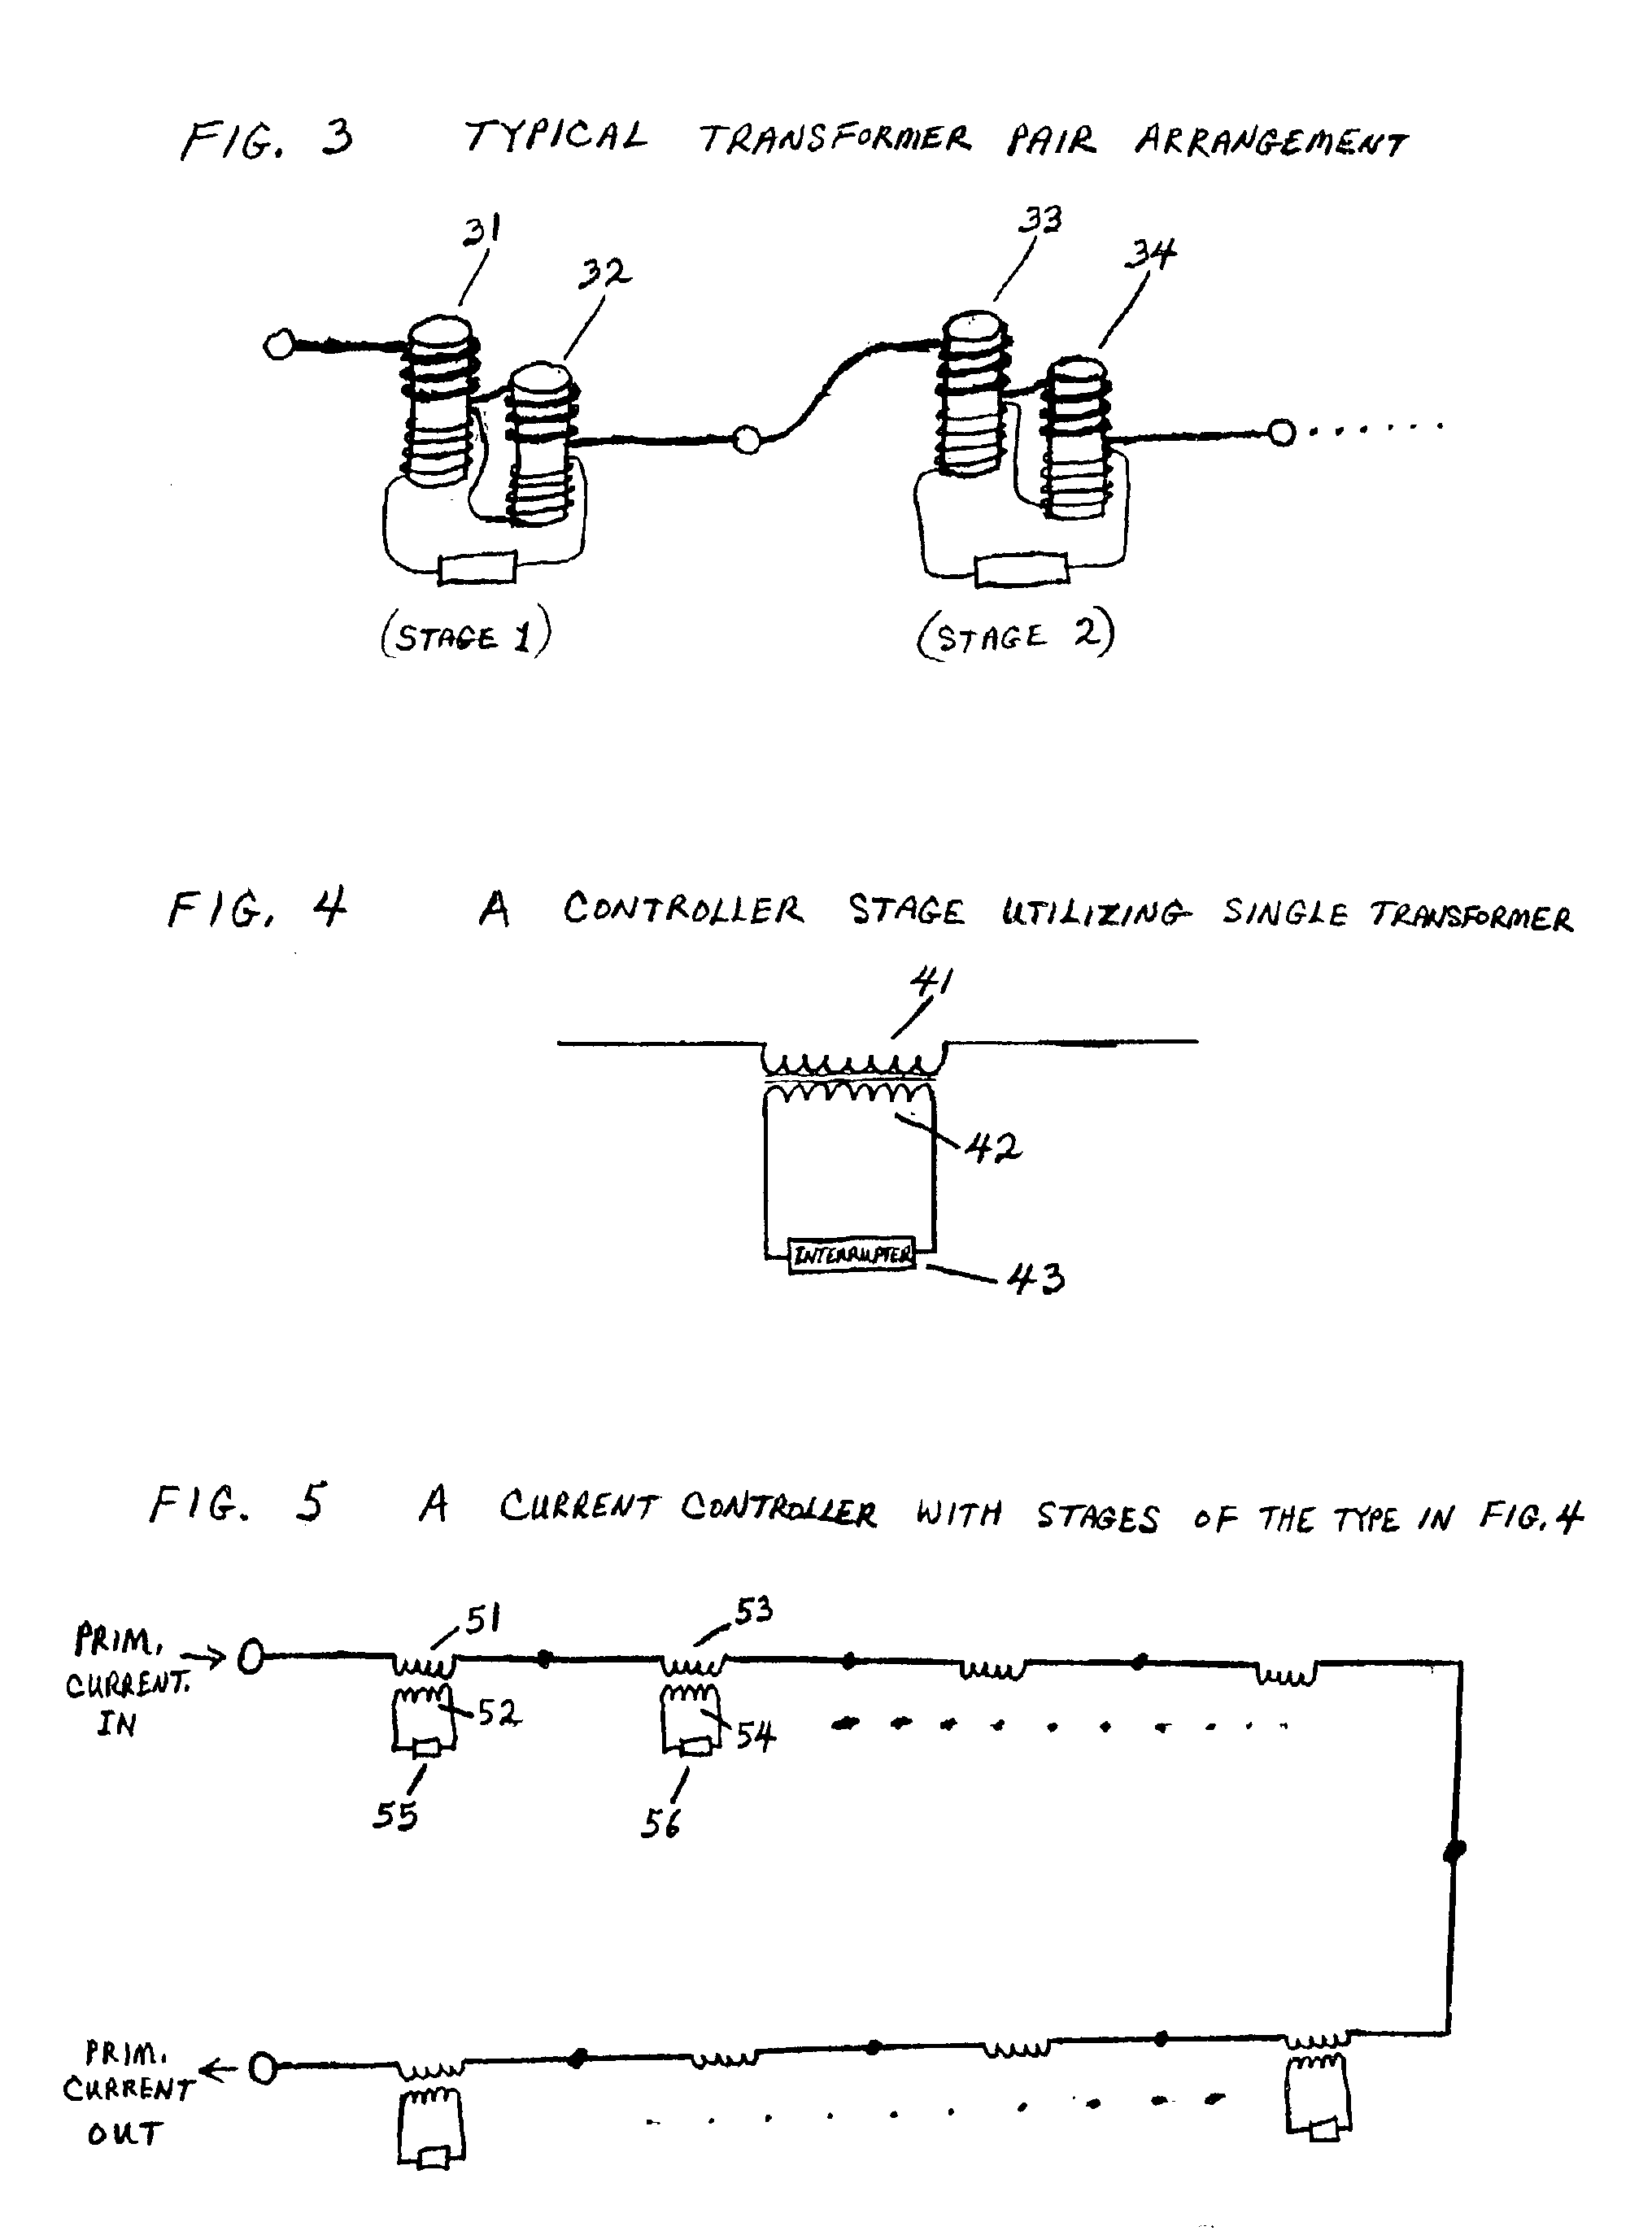 Fast, variable, and reliable power system controller design